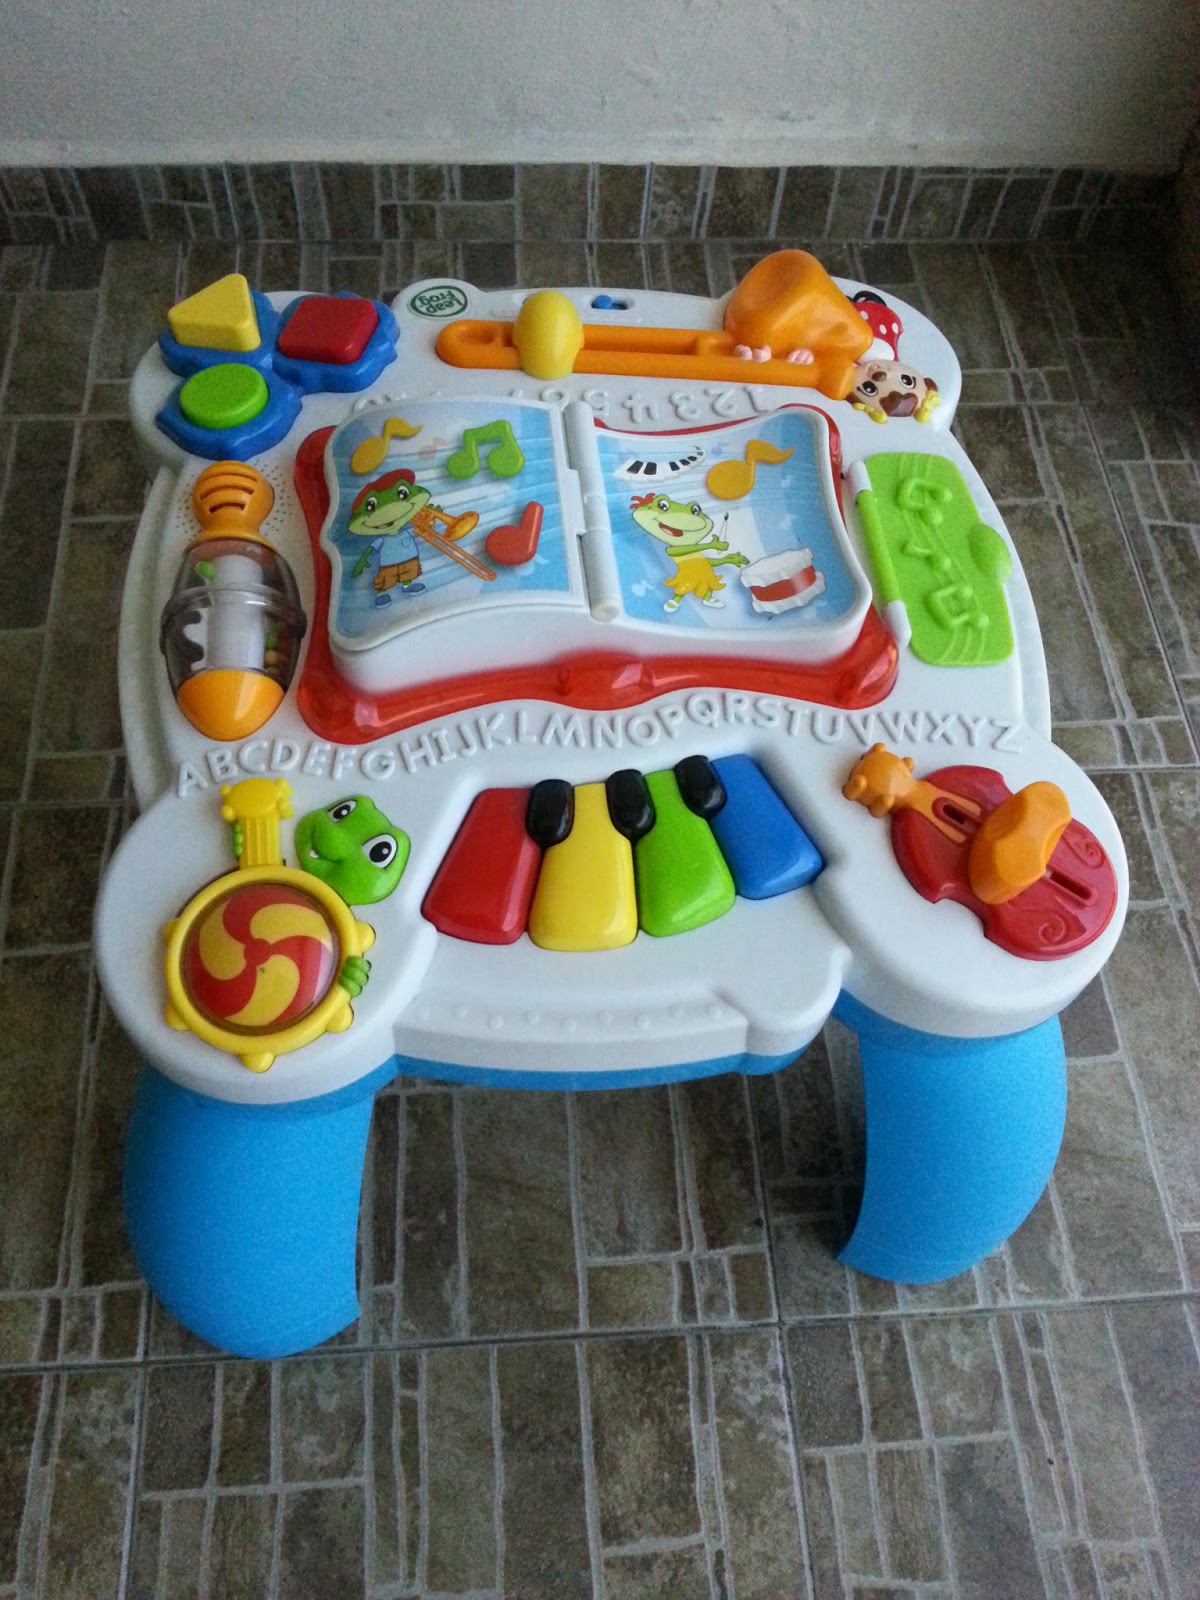 Joys Of Toy Baby Stuff Preloved Leapfrog Musical Activity Table